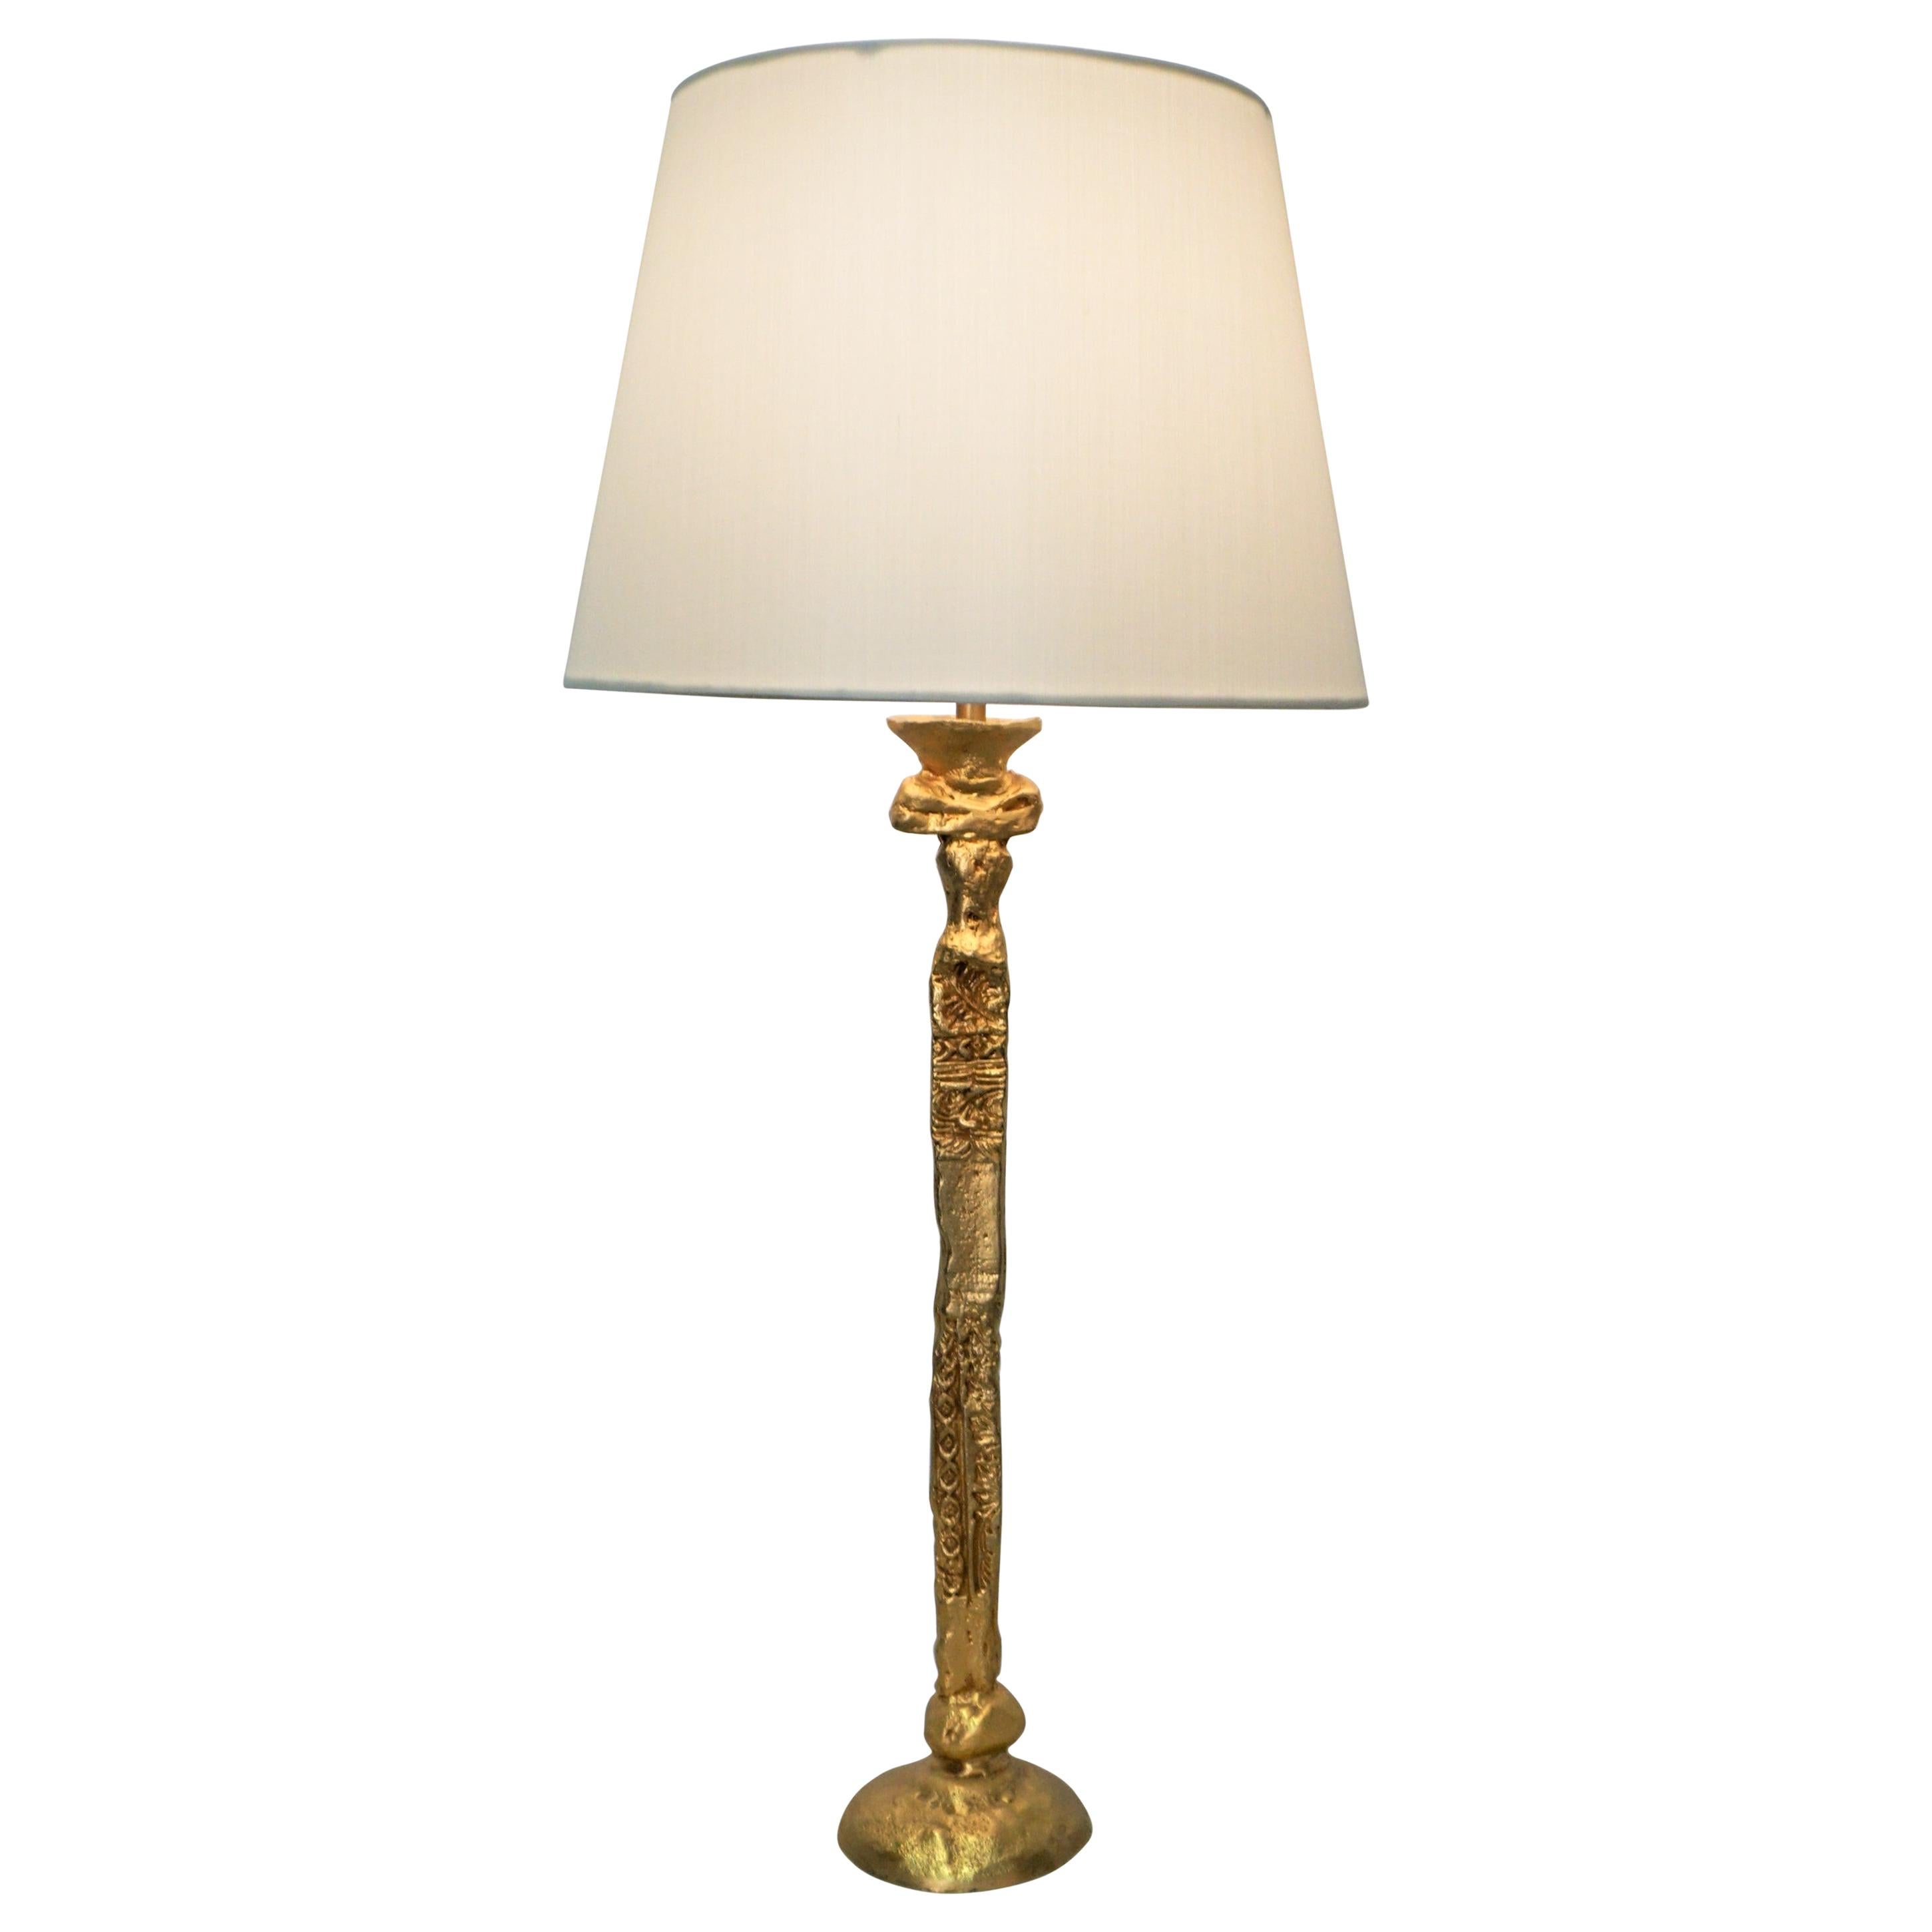 Gilt Bronze Table Lamp by Pierre Casenove for Fondica, France